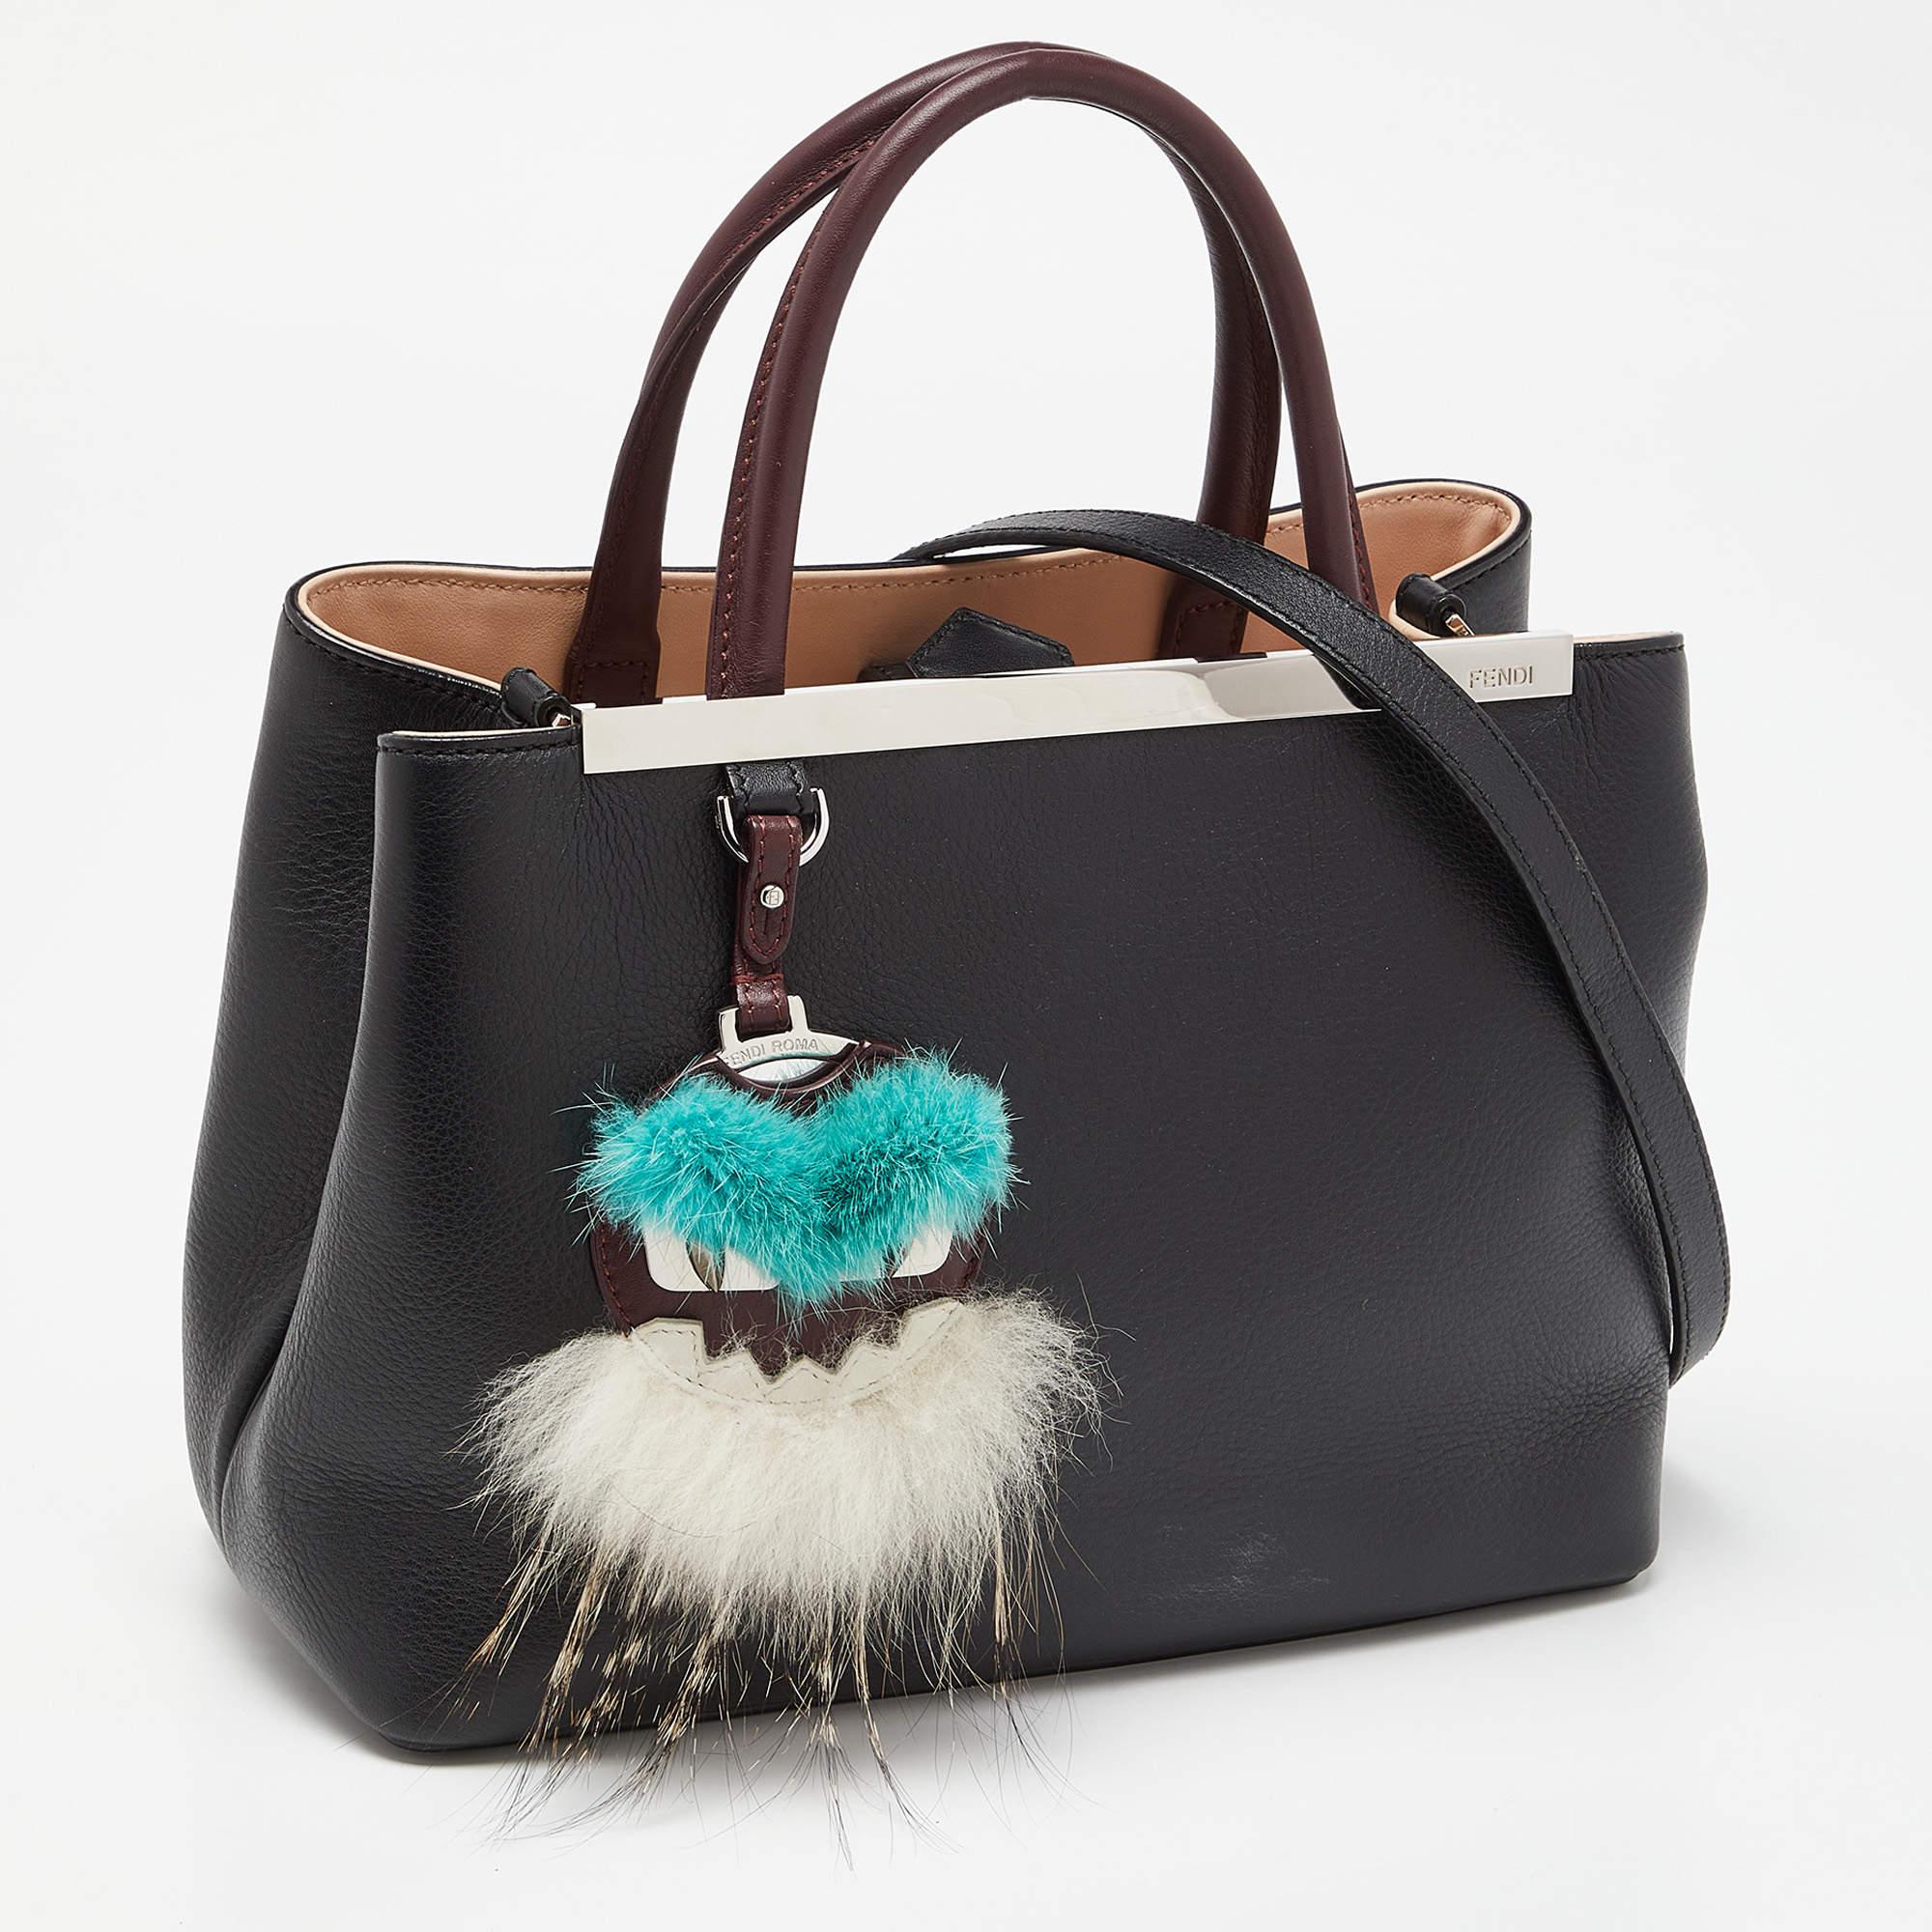 Fendi's 2Jours tote is one of the most iconic designs from the label and continues to gain popularity globally. This version is made from leather and flaunts a monster eye detail at the front. It has silver-toned hardware, dual handles, a shoulder